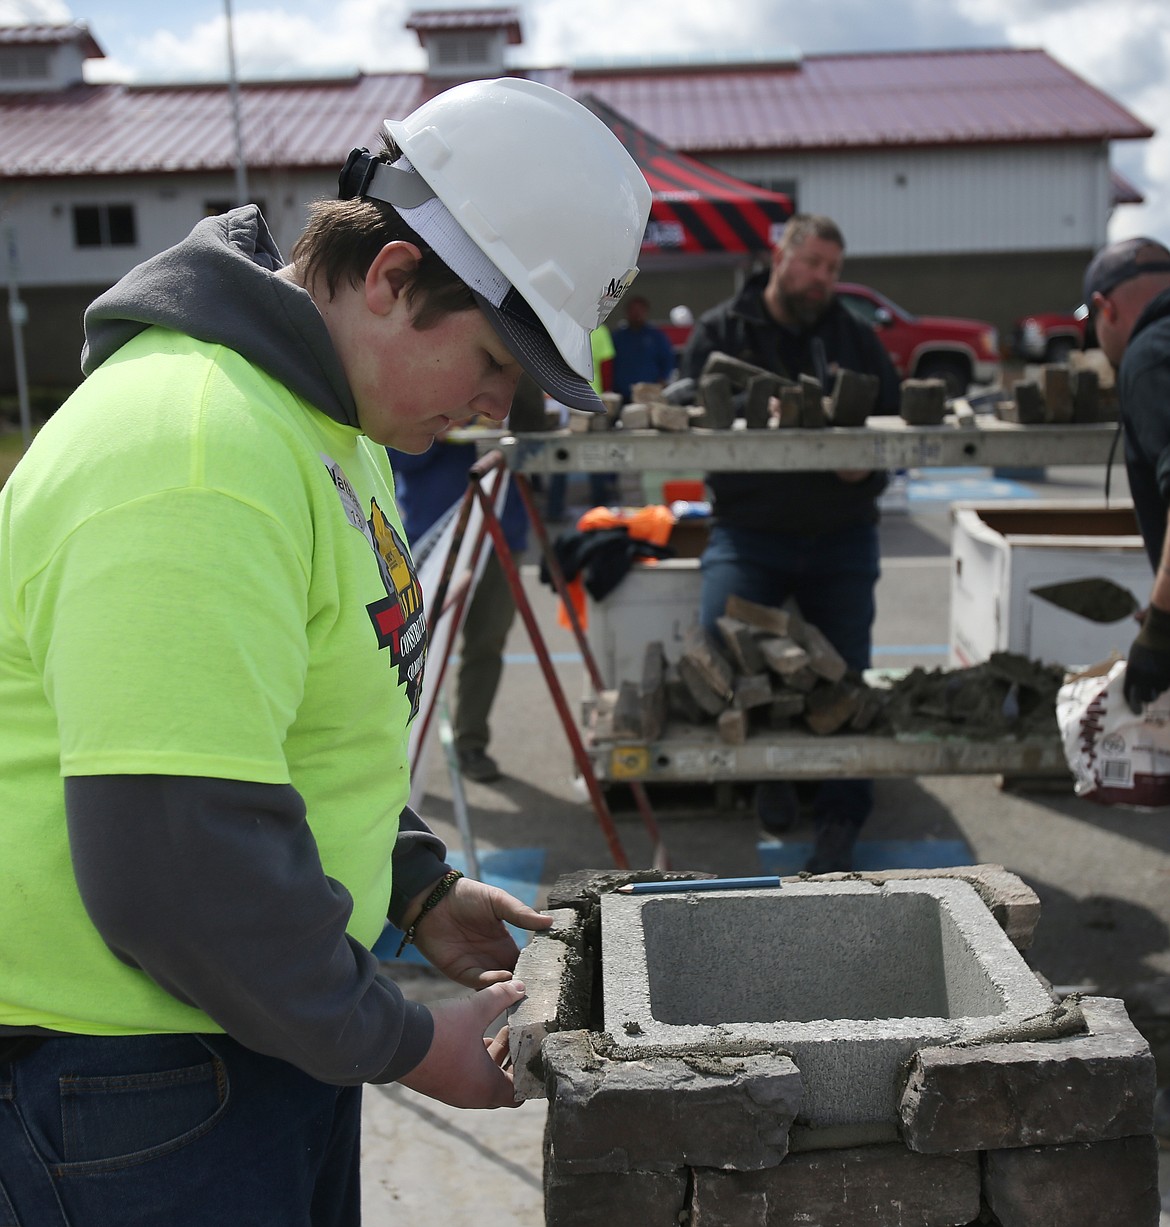 Lake City High School sophomore Nathan Briggs makes a chimney during the Construction Combine event Thursday at Kootenai Technical Education Campus.